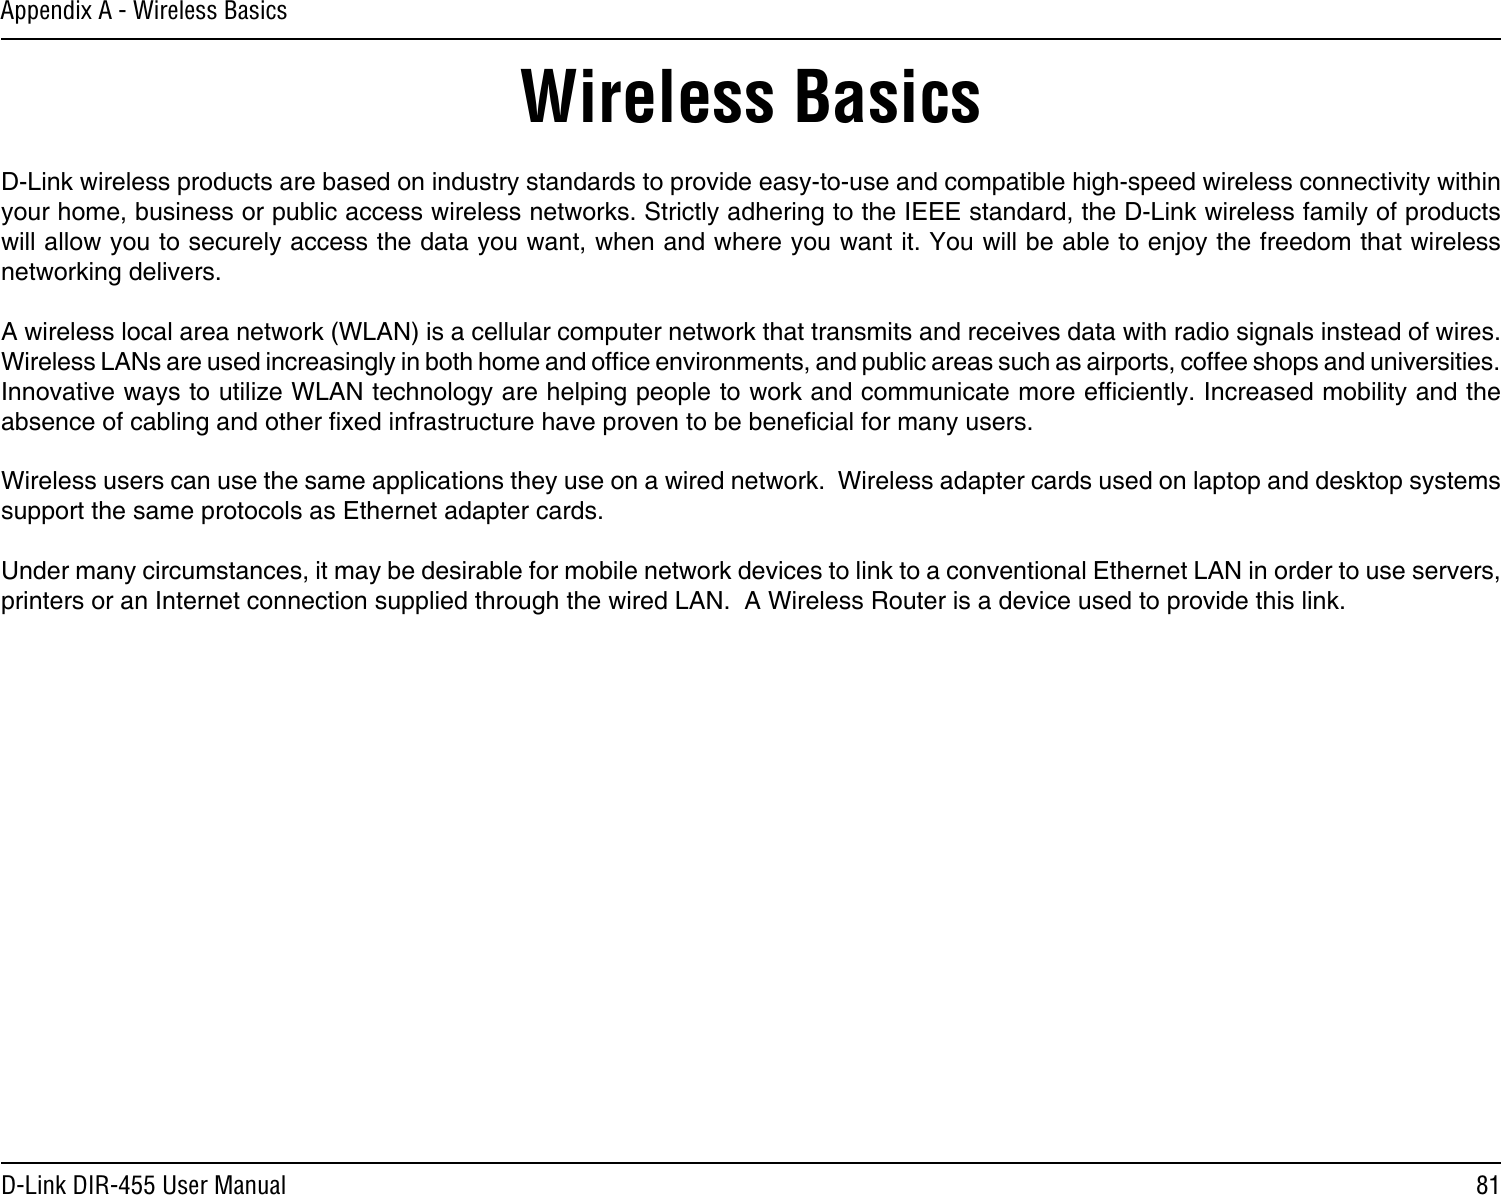 81D-Link DIR-455 User ManualAppendix A - Wireless BasicsD-Link wireless products are based on industry standards to provide easy-to-use and compatible high-speed wireless connectivity within your home, business or public access wireless networks. Strictly adhering to the IEEE standard, the D-Link wireless family of products will allow you to securely access the data you want, when and where you want it. You will be able to enjoy the freedom that wireless networking delivers.A wireless local area network (WLAN) is a cellular computer network that transmits and receives data with radio signals instead of wires. Wireless LANs are used increasingly in both home and ofce environments, and public areas such as airports, coffee shops and universities. Innovative ways to utilize WLAN technology are helping people to work and communicate more efciently. Increased mobility and the absence of cabling and other xed infrastructure have proven to be benecial for many users. Wireless users can use the same applications they use on a wired network.  Wireless adapter cards used on laptop and desktop systems support the same protocols as Ethernet adapter cards. Under many circumstances, it may be desirable for mobile network devices to link to a conventional Ethernet LAN in order to use servers, printers or an Internet connection supplied through the wired LAN.  A Wireless Router is a device used to provide this link.Wireless Basics